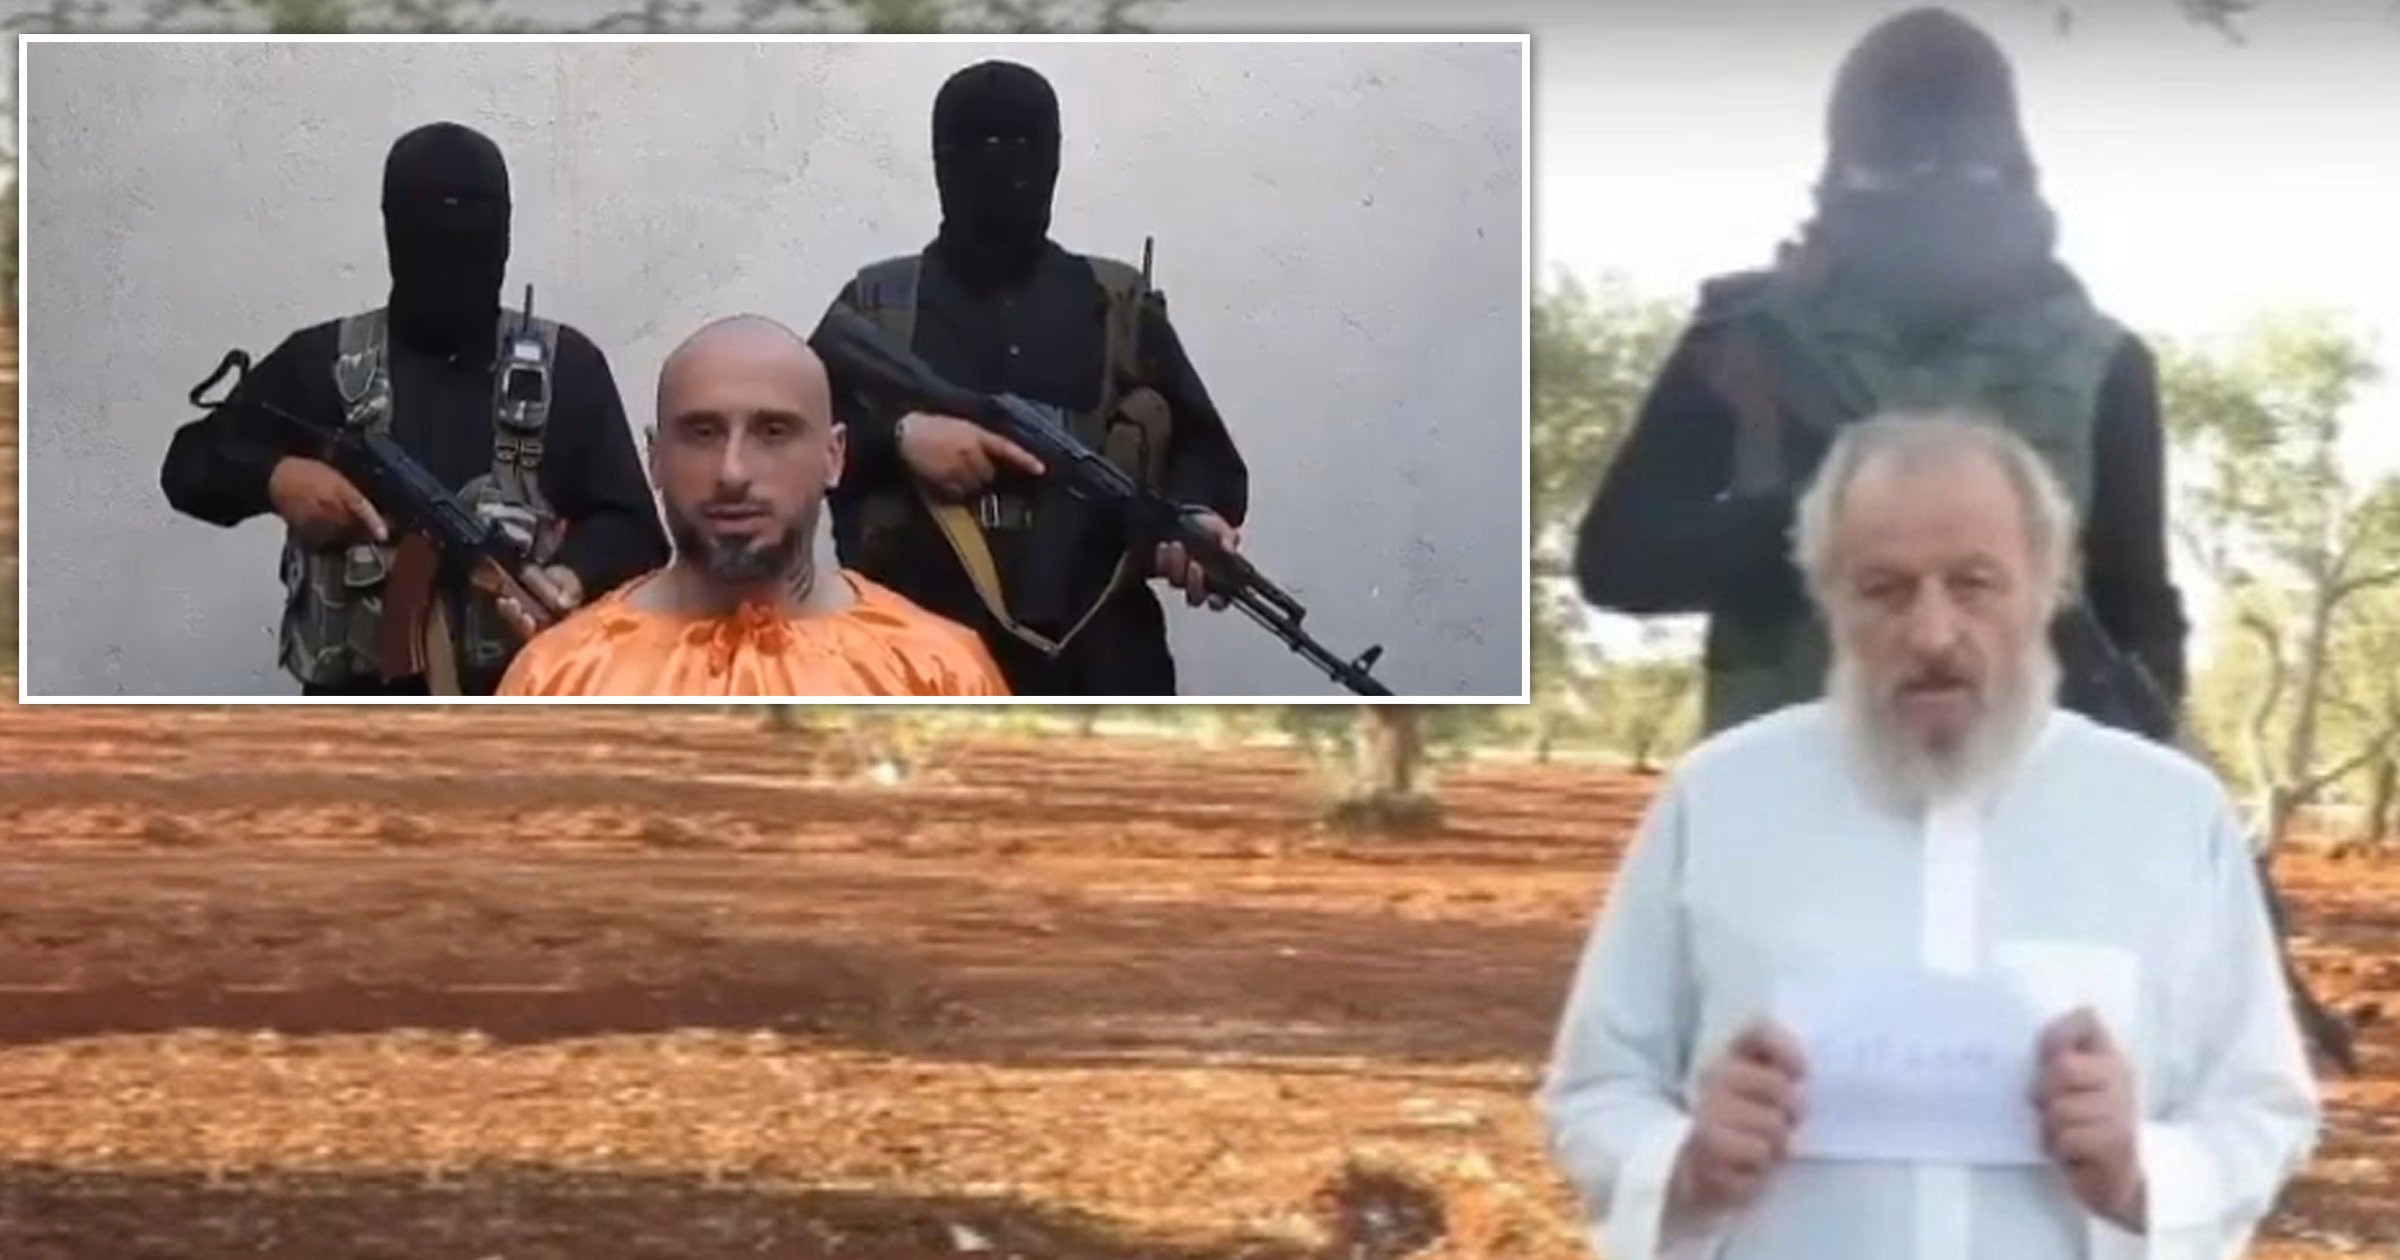 Italian businessmen ‘plotted fake kidnappings’ but were sold to jihadists